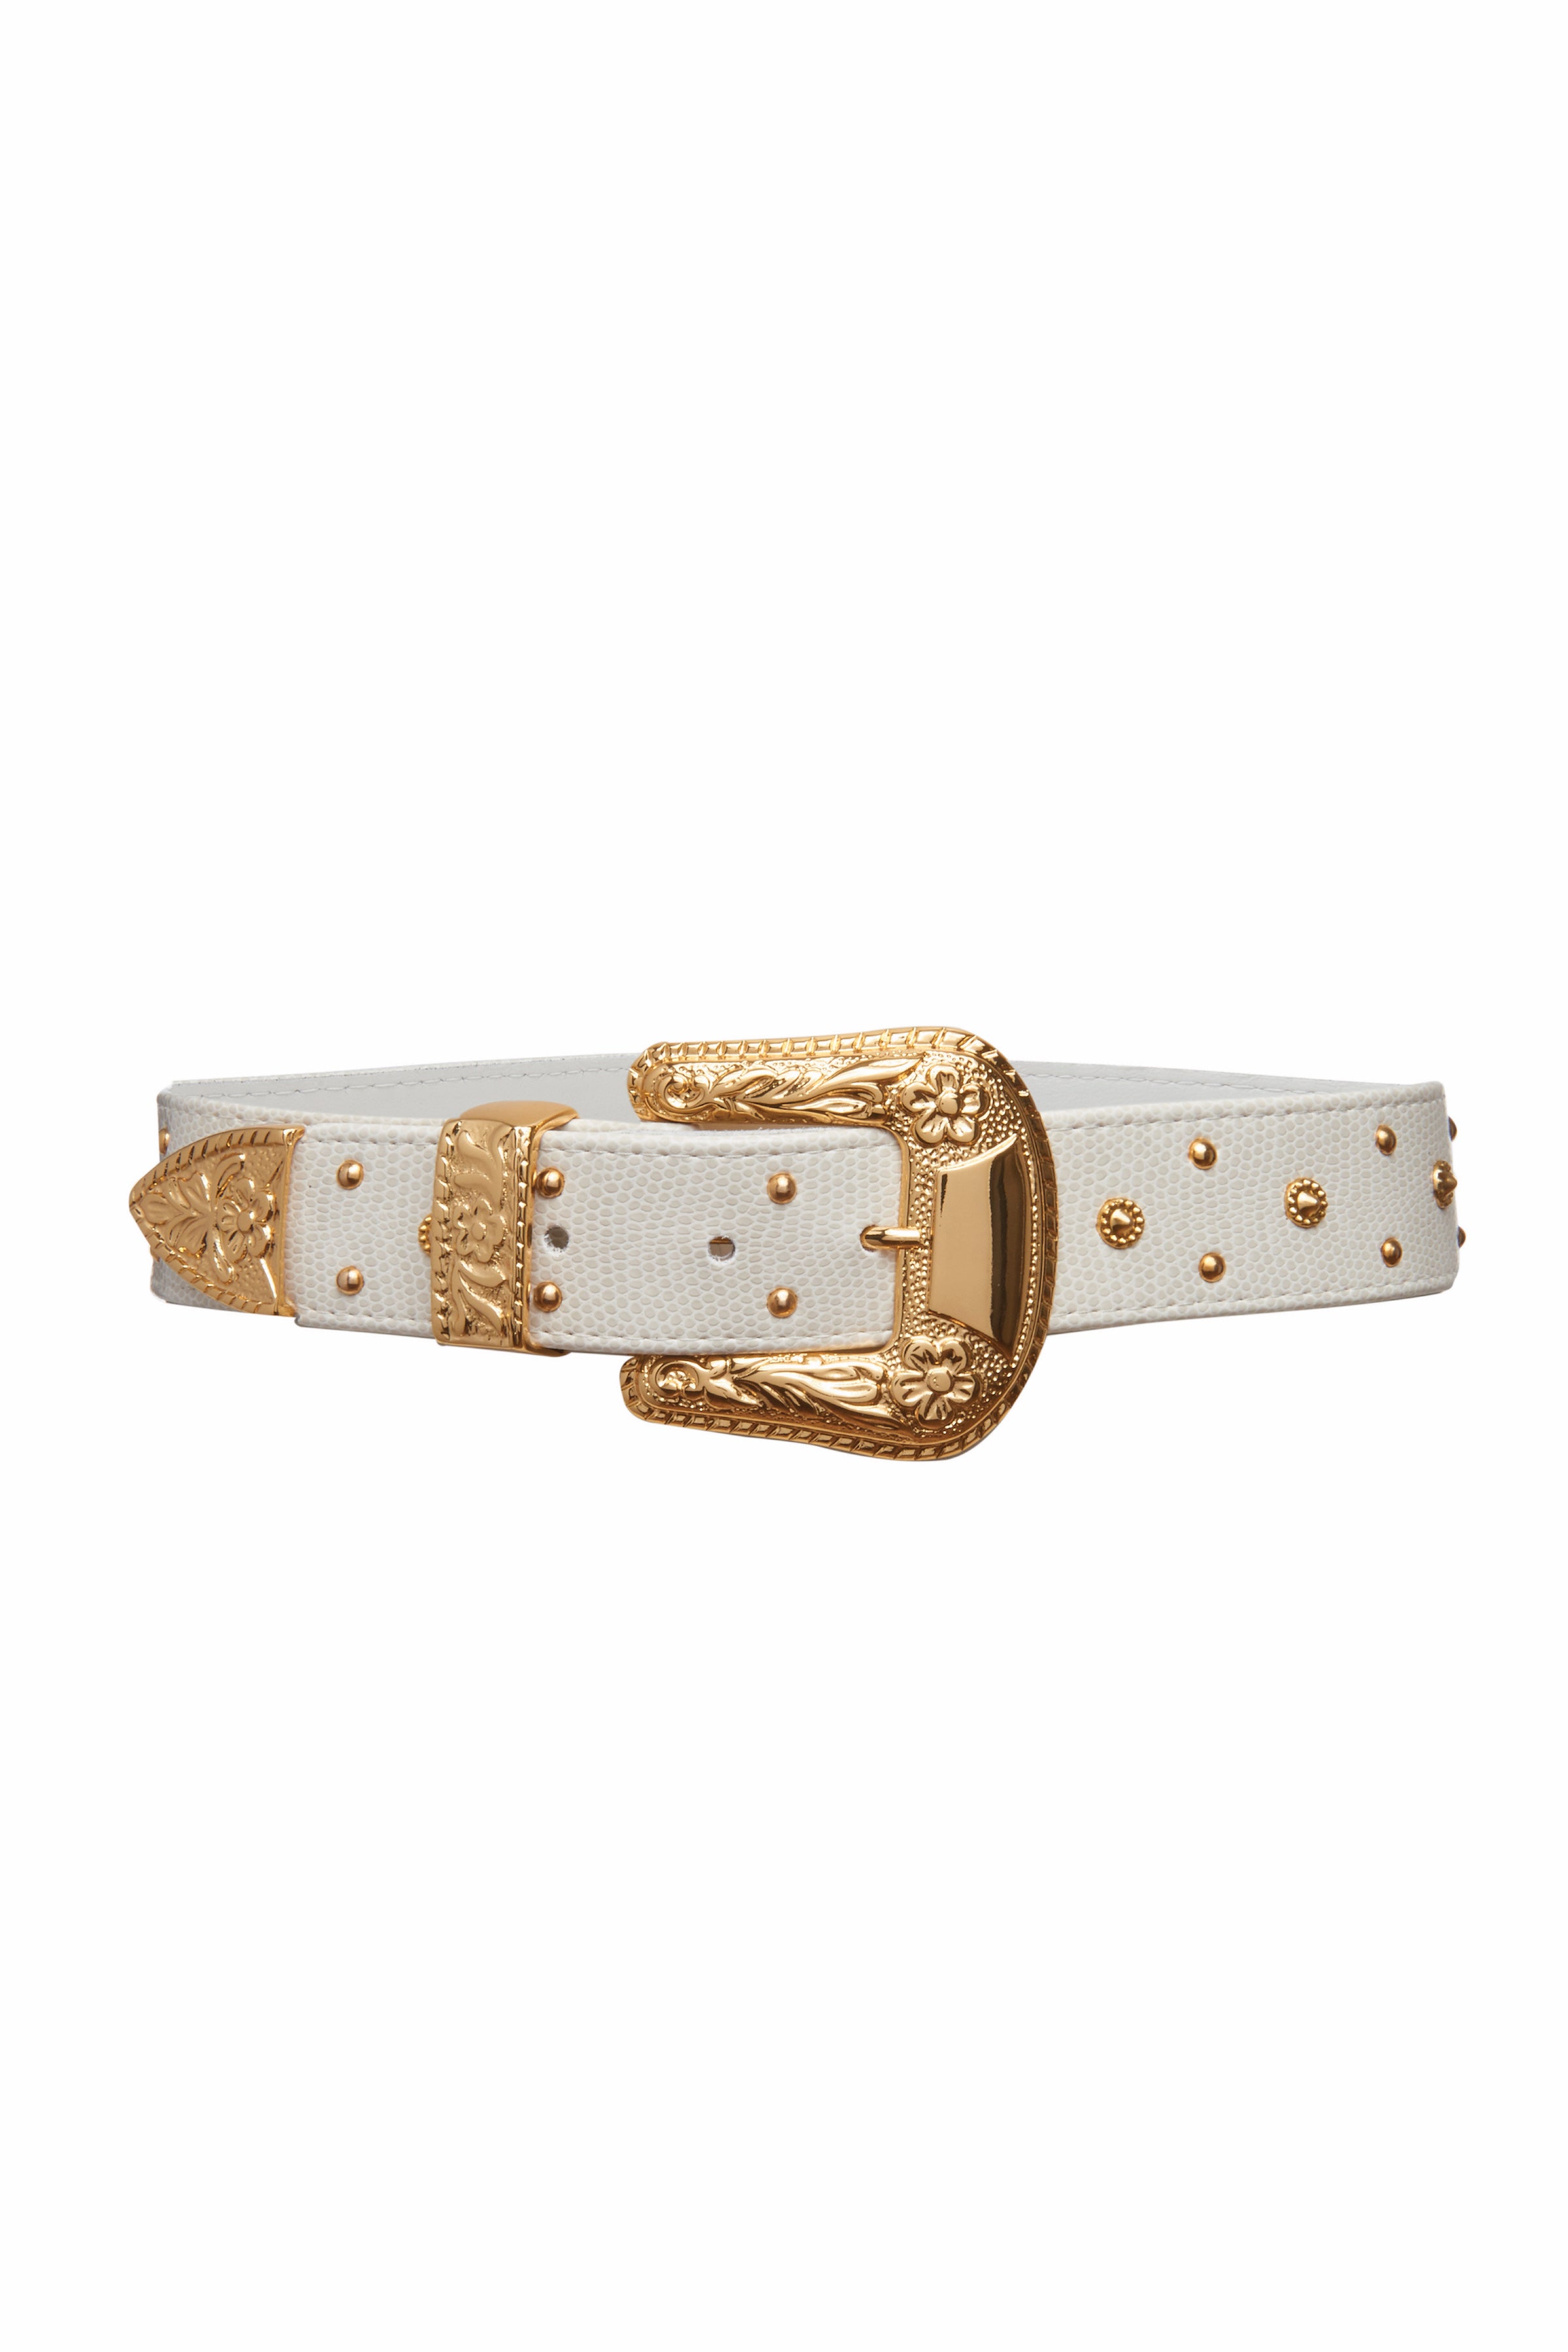 Serendipity White Leather Belt with Engraved Gold Buckle and Studs